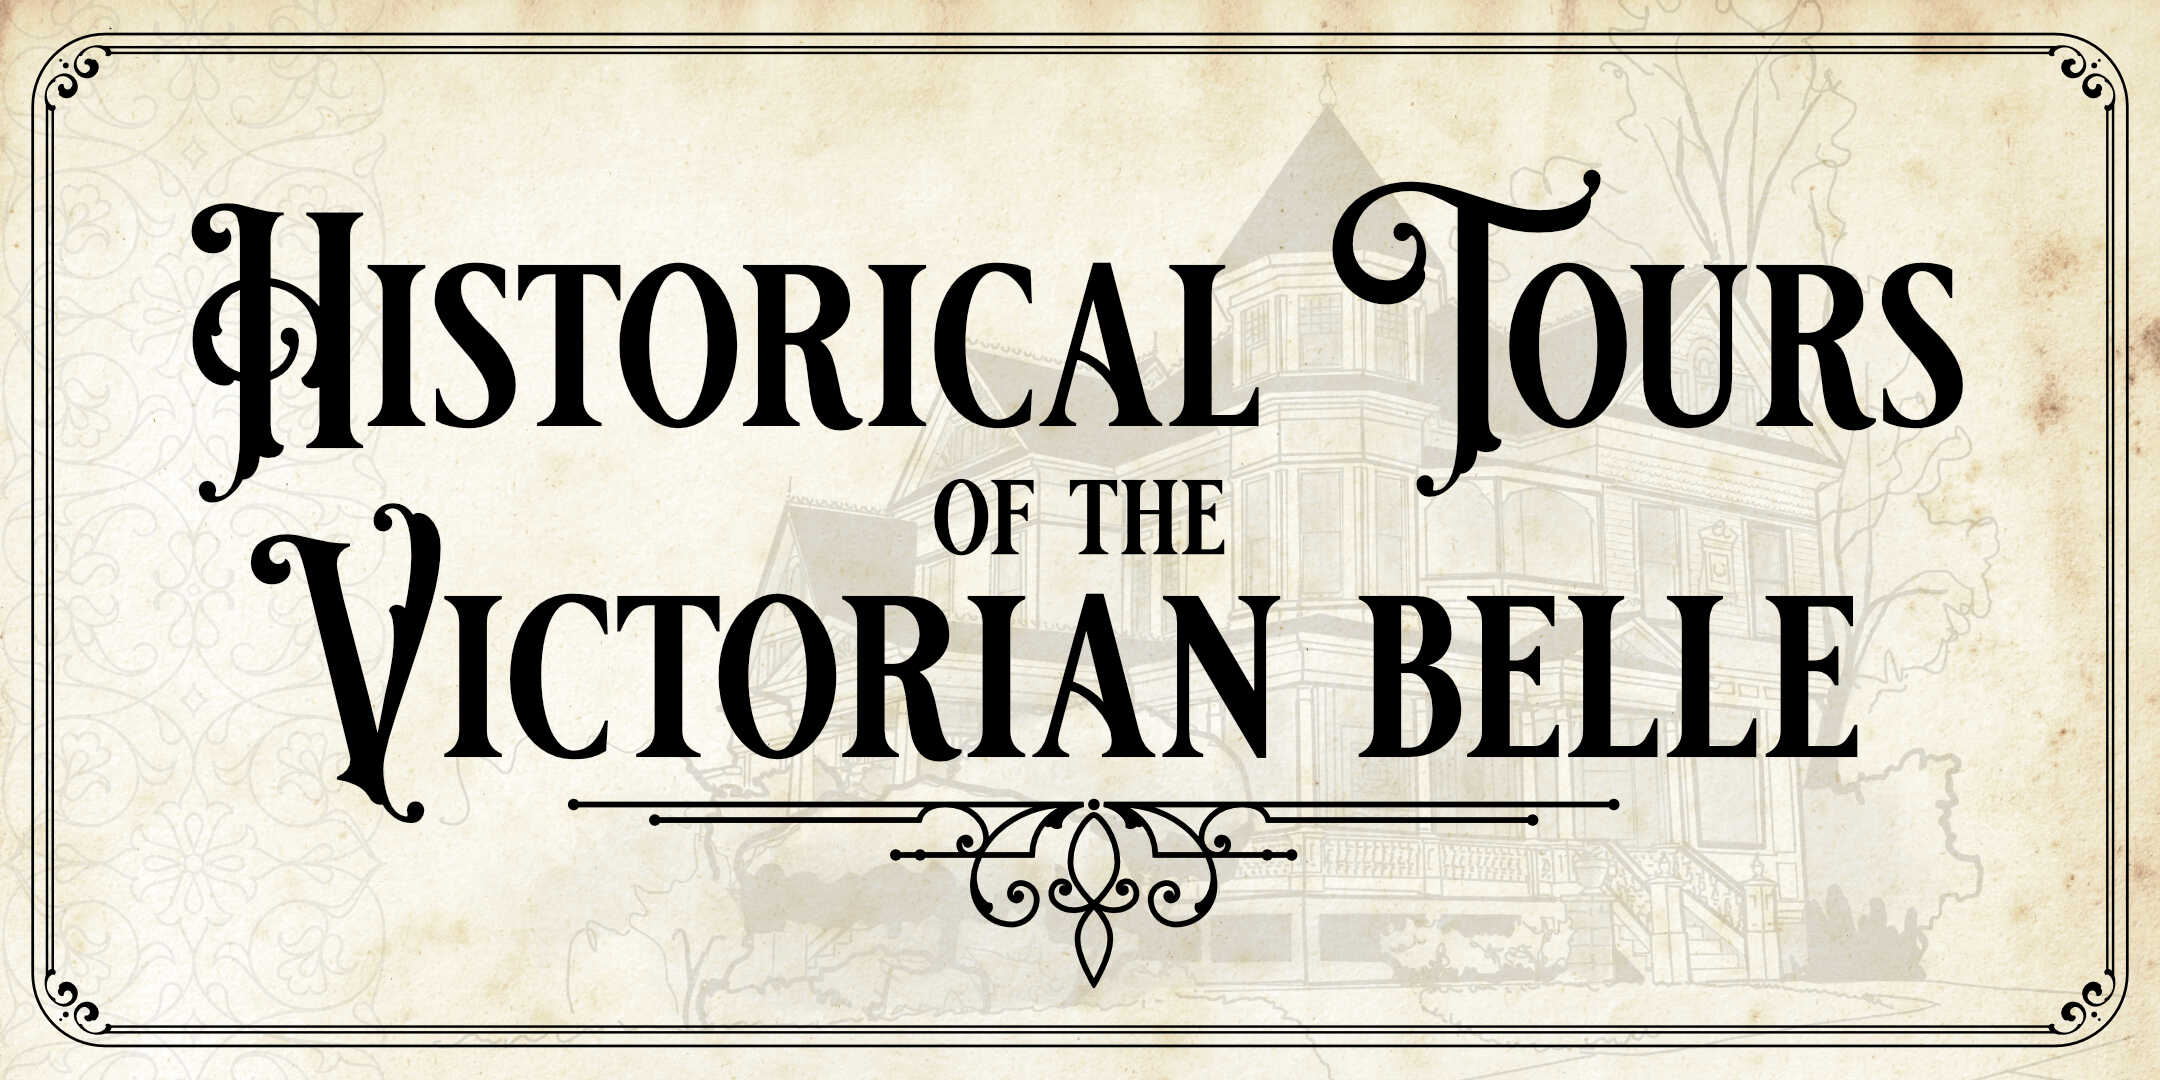 Historical Tours of the Victorian Belle